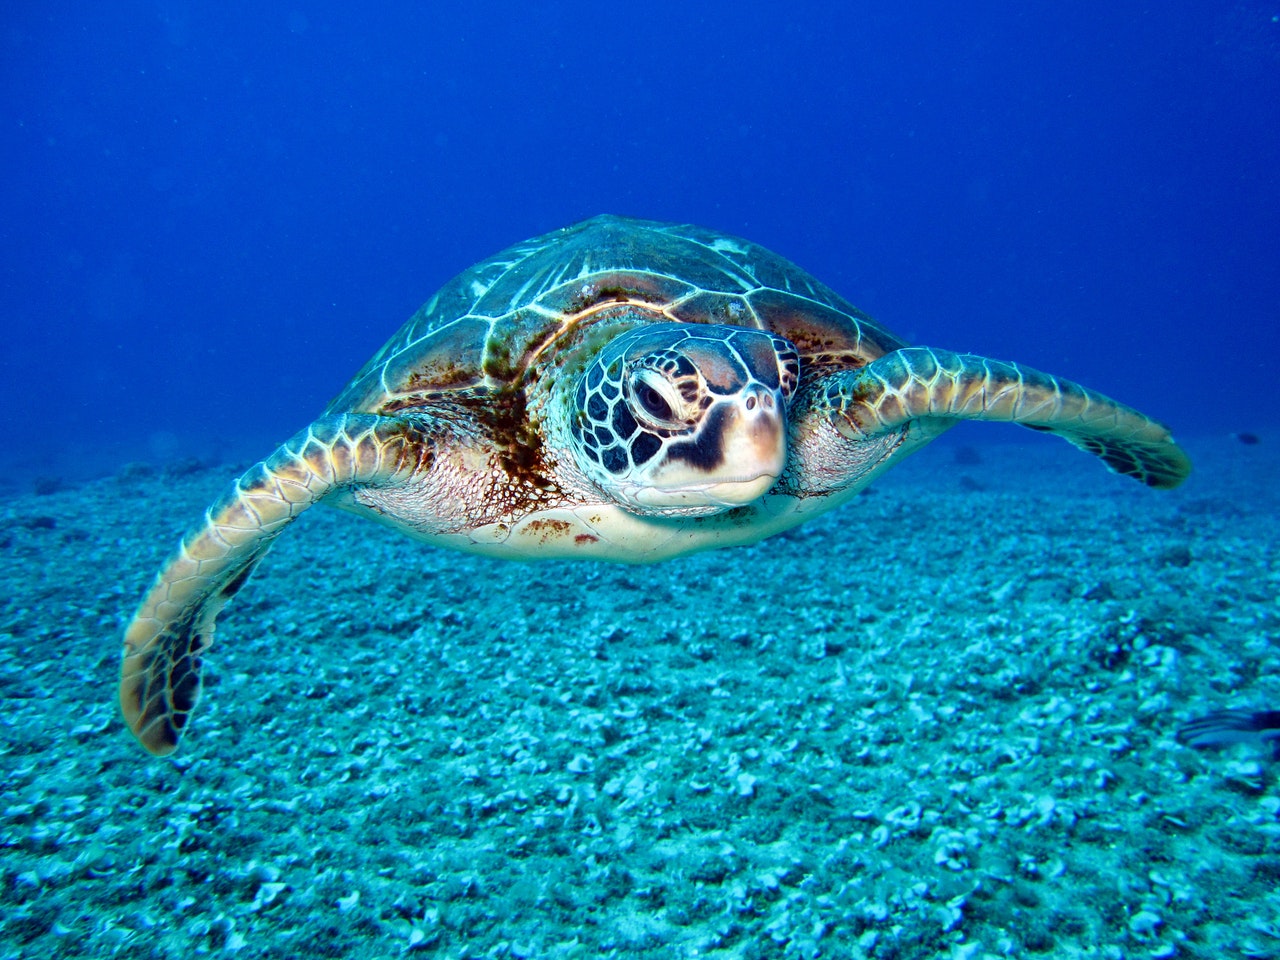 hawksbill, brown and white sea turtle swimming underwater with its face facing toward you